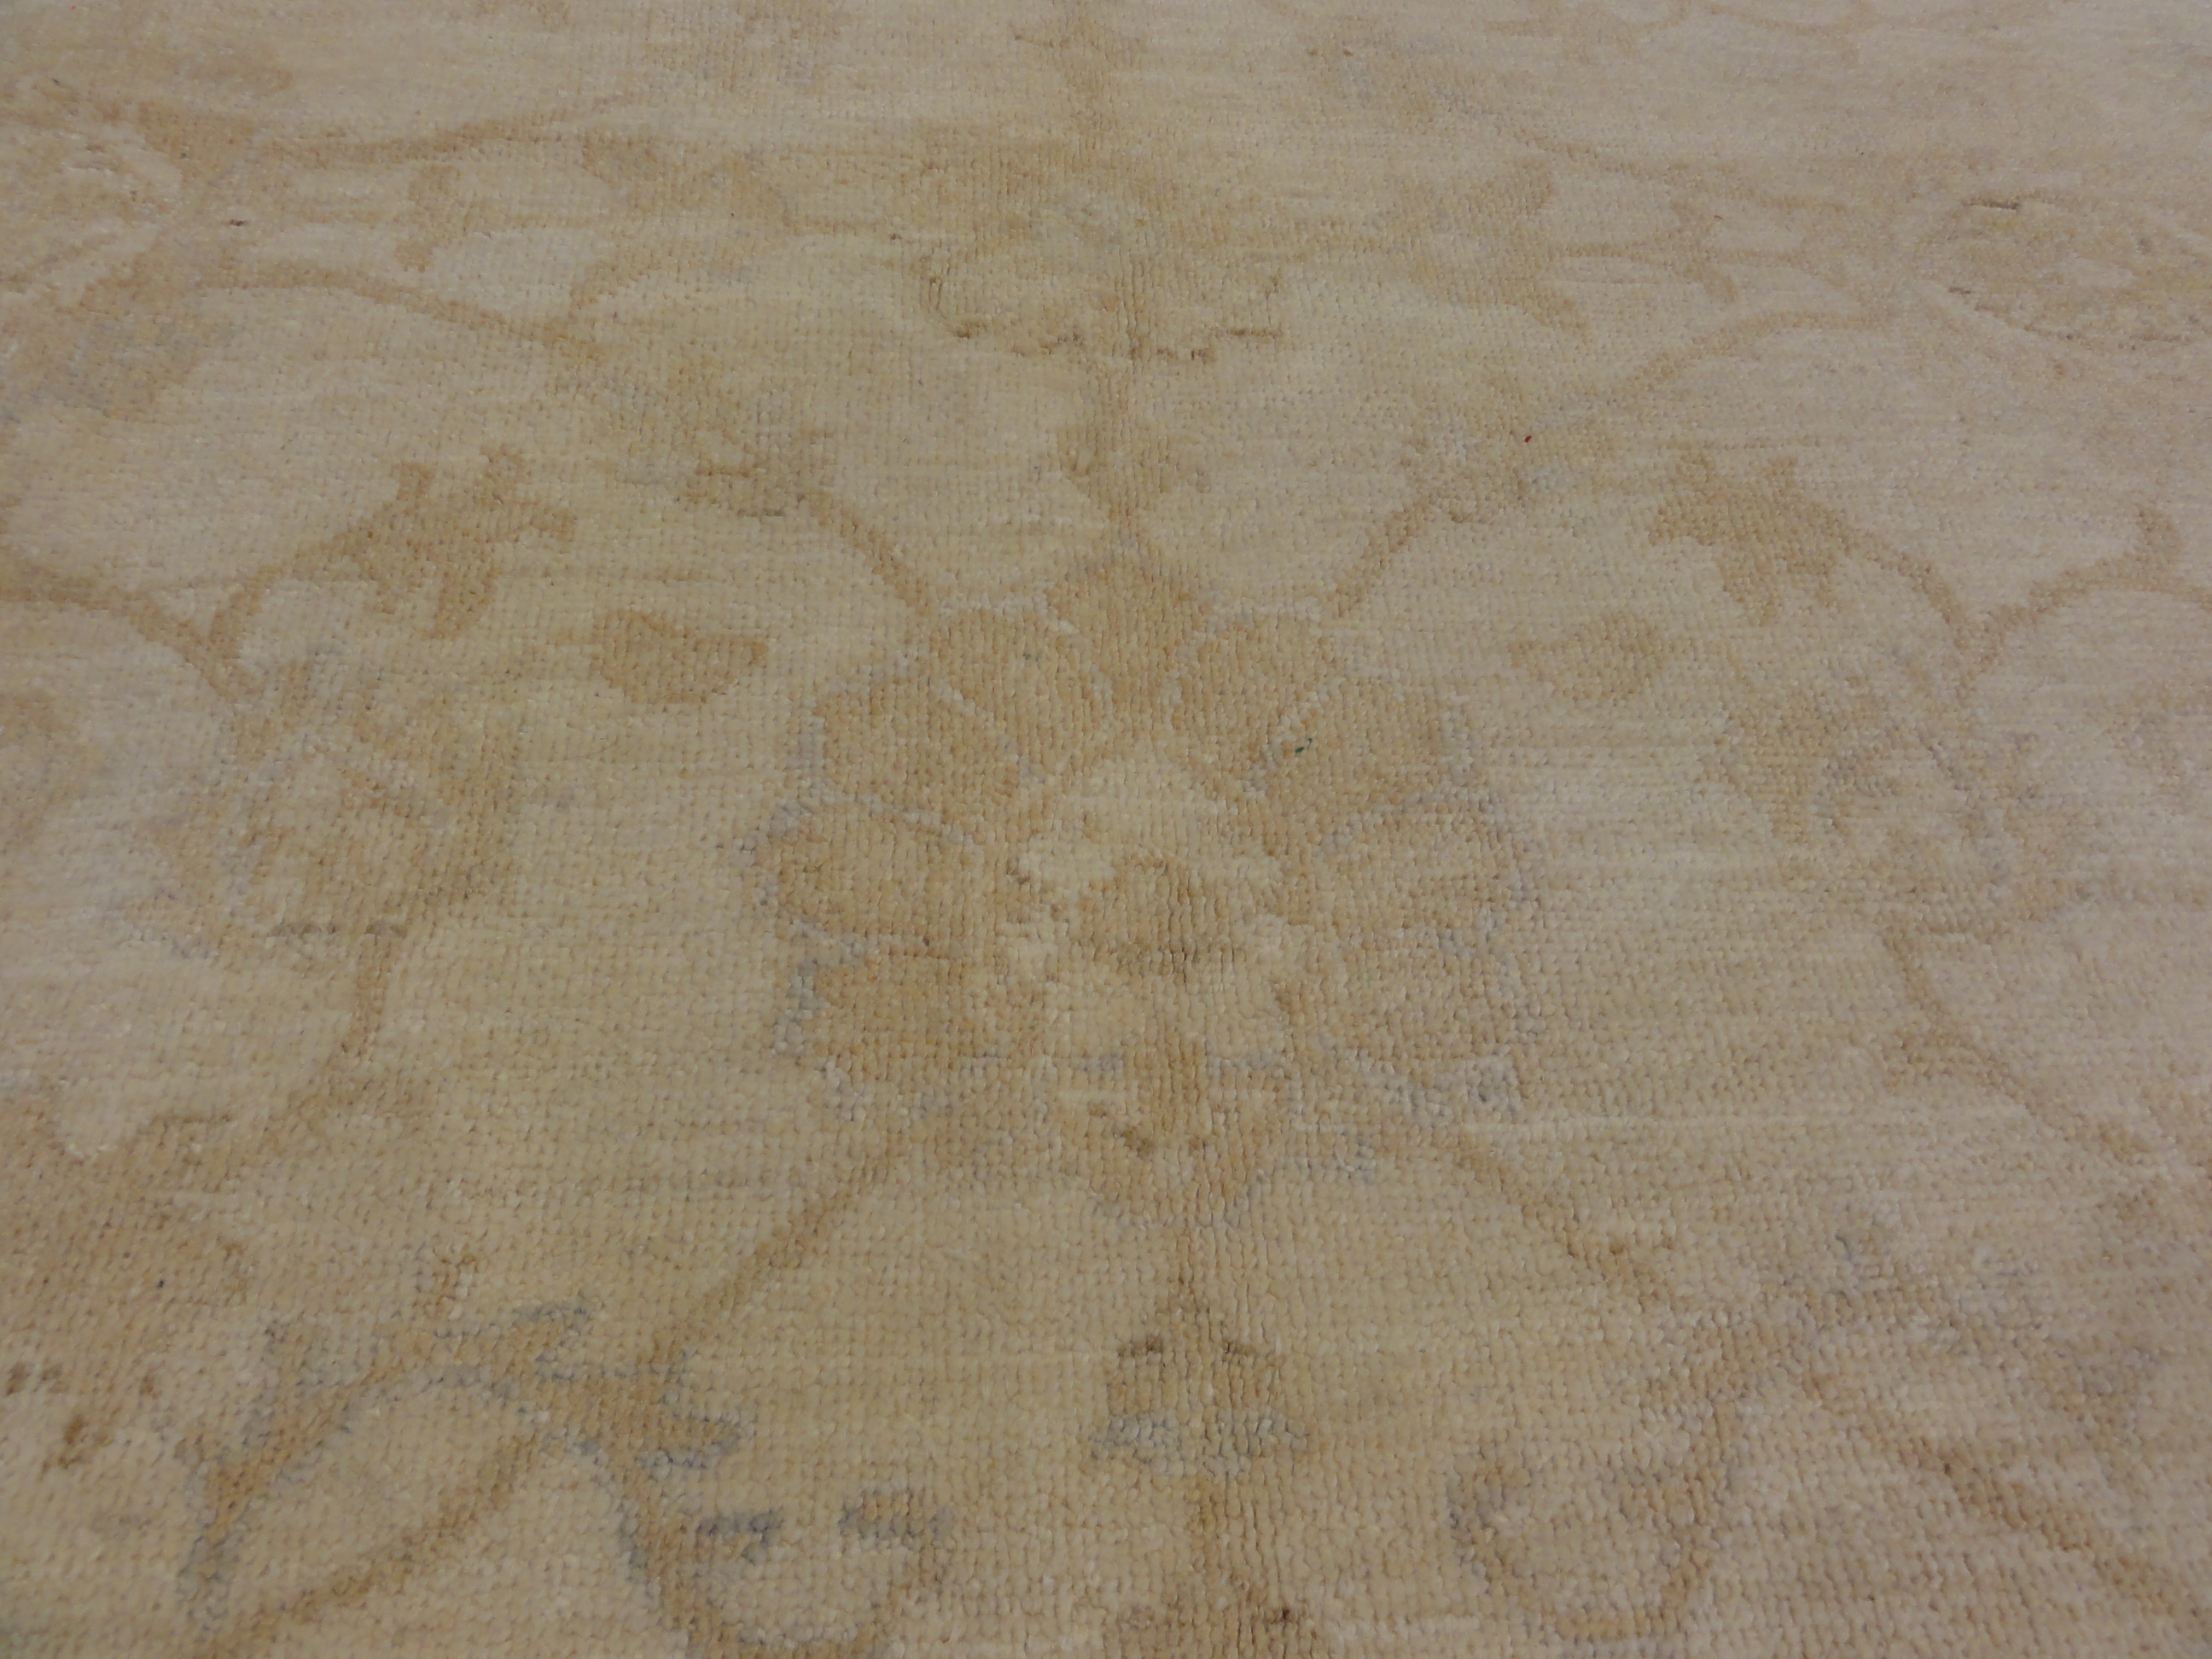 Finest Ziegler Oushak 30284. A piece of genuine authentic woven carpet art sold by Santa Barbara Design Center, Rugs and More.